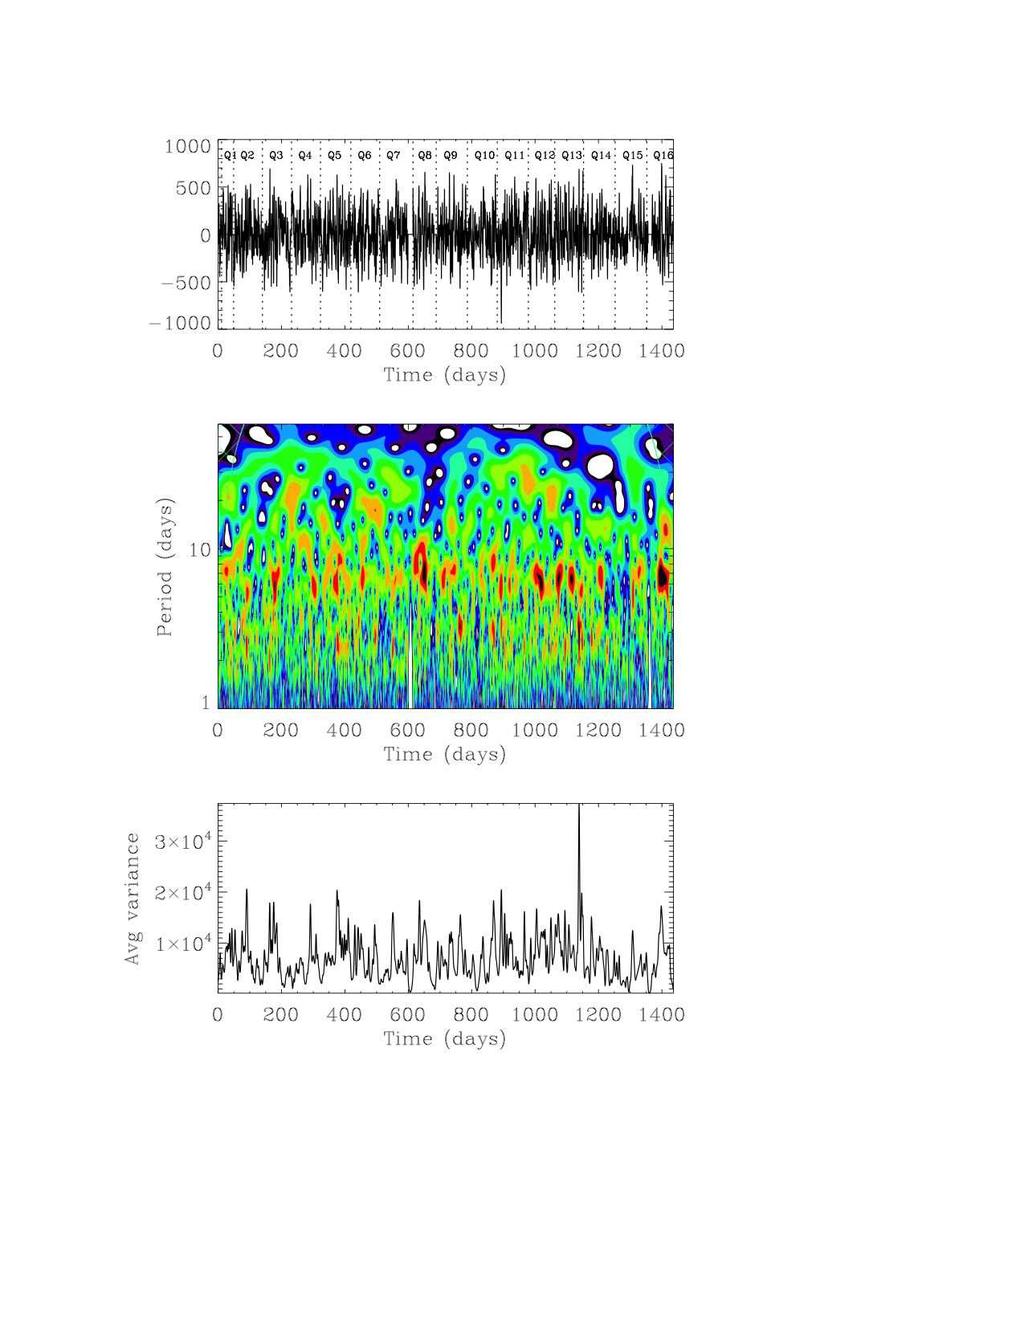 A&A proofs: manuscript no. Activity_Fstars_accepted Fig. A.1. Wavelet analysis of KIC 1430163 (group O). Top panel: temporal variation of the flux after the corrections applied as in García et al.